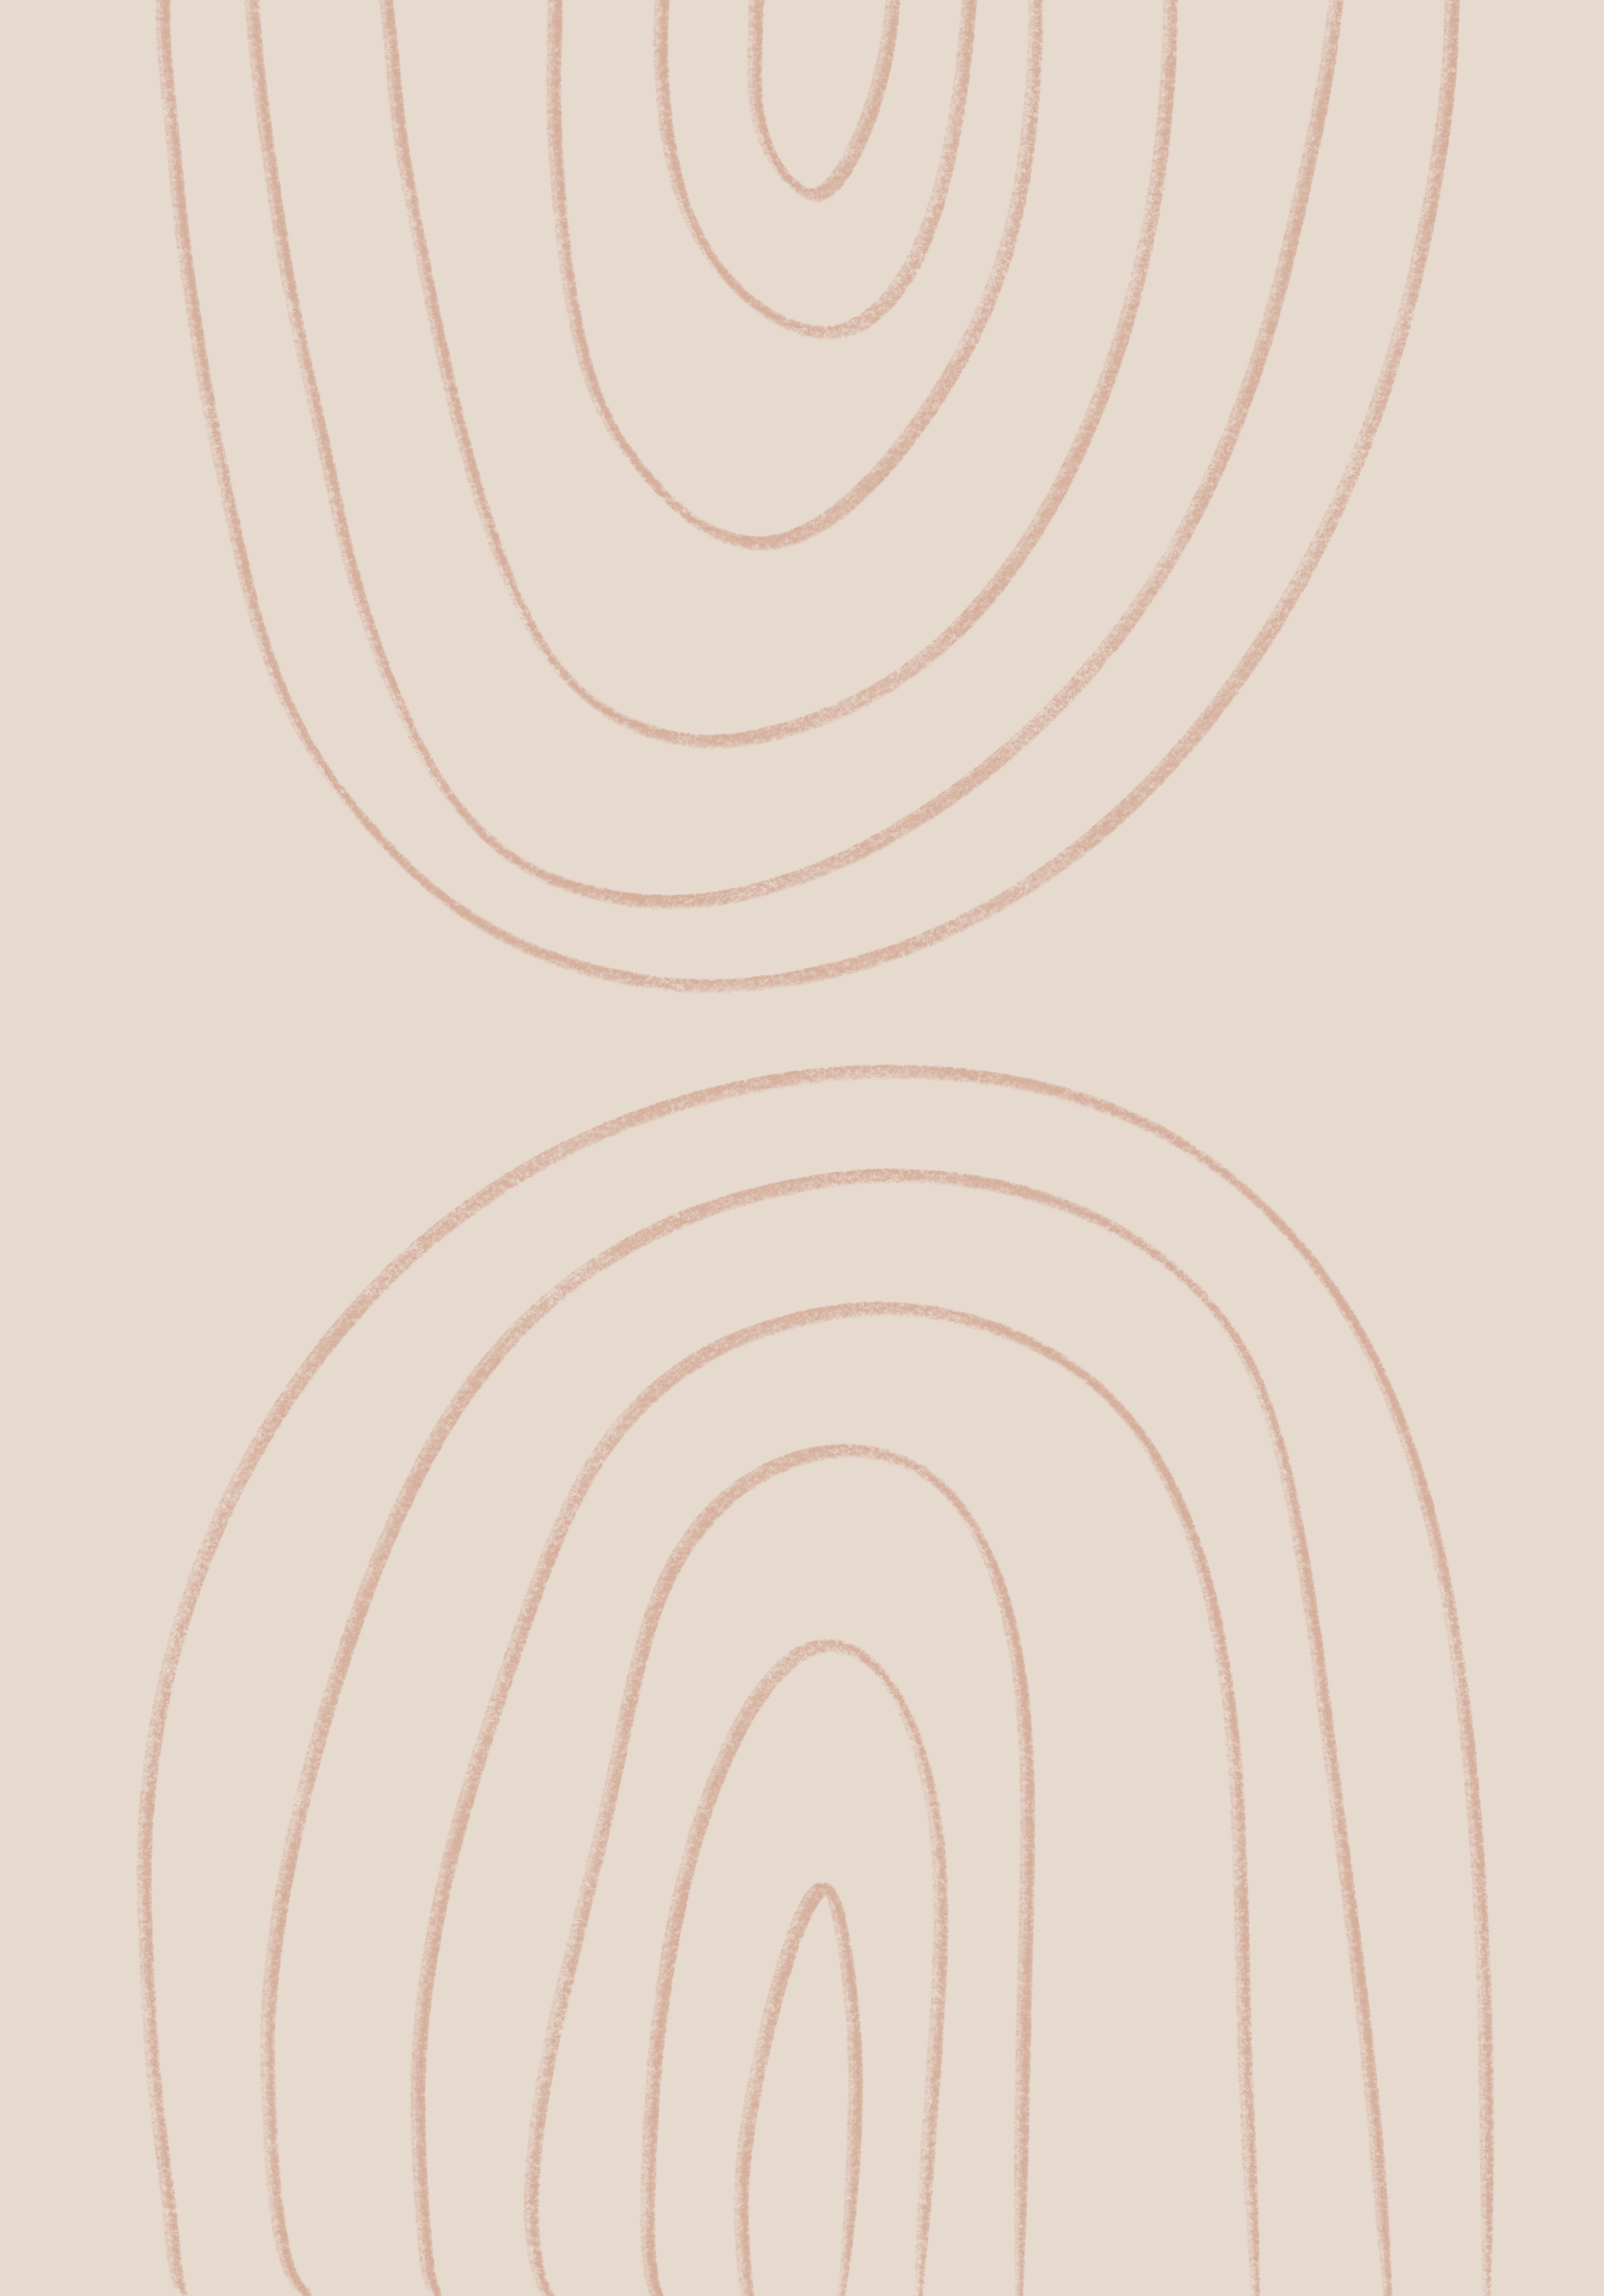 An image of two abstract shapes on a tan background - IPad